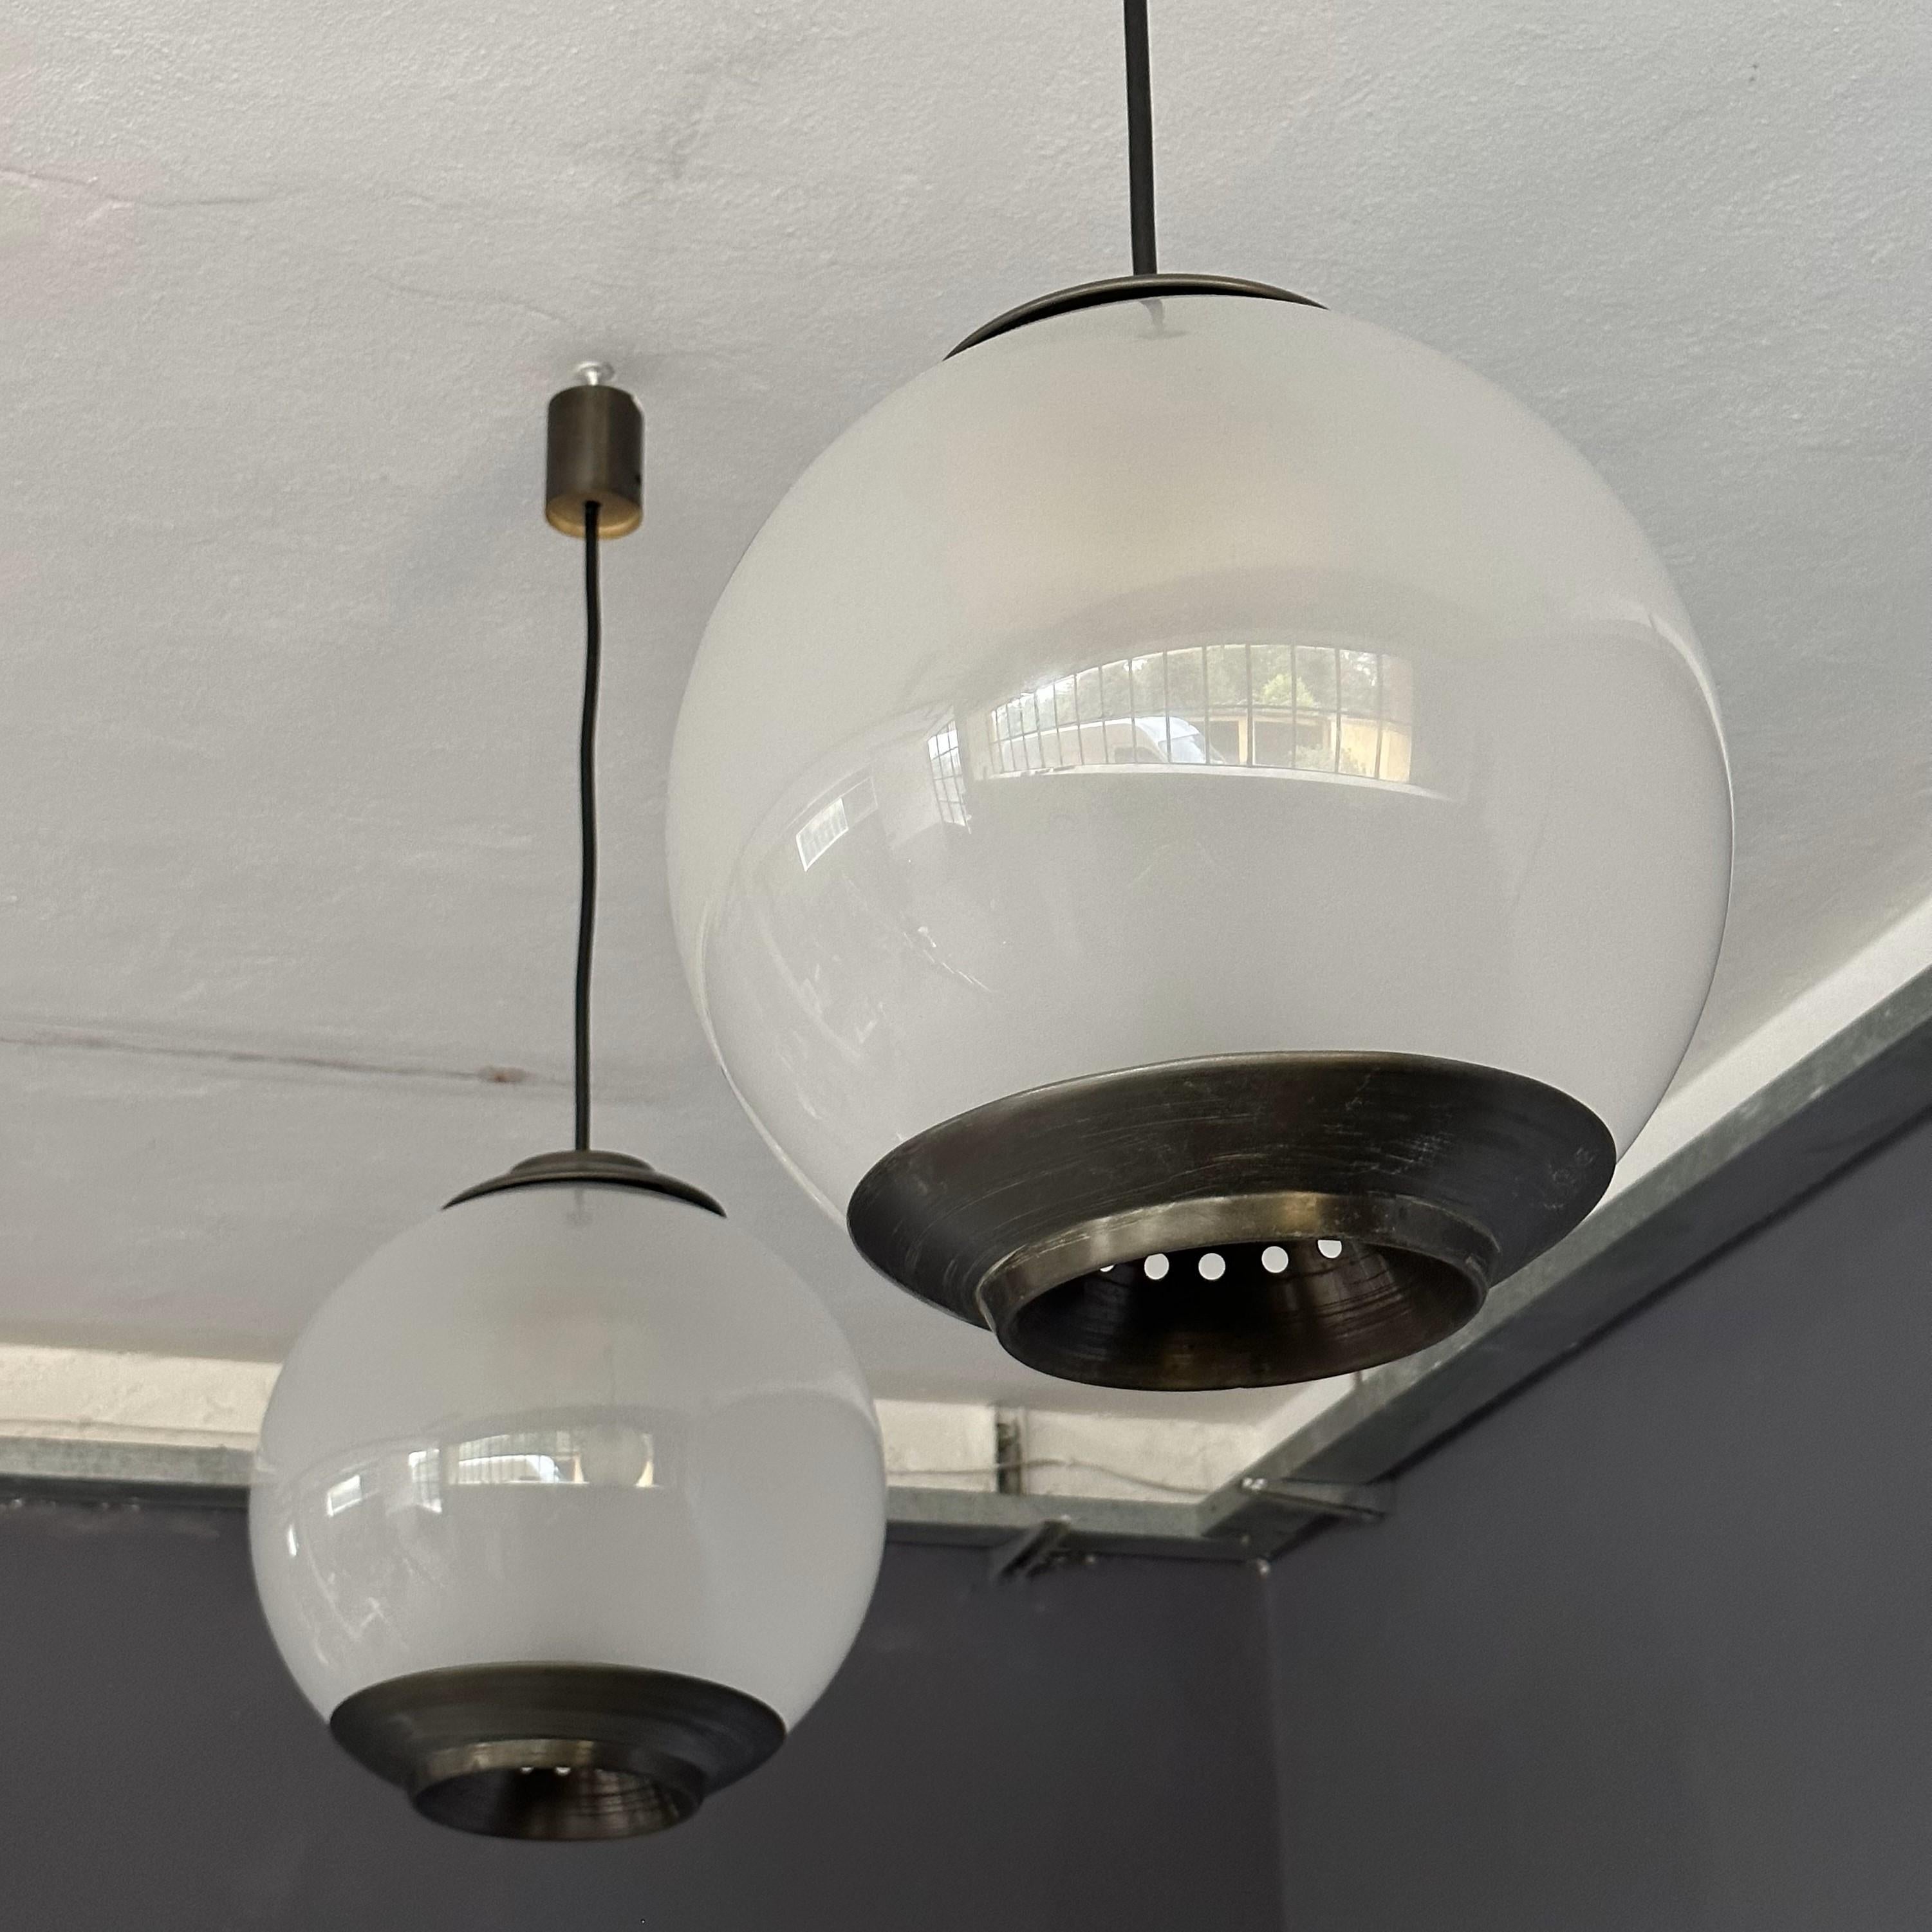 Set of two 'PALLONE' suspension chandeliers, designed by Luigi Caccia Dominioni  for Azucena, 1950s, Italian manufacture.
Brass plates, blown frosted glass shade and black rope with brass ceiling cup.

Diameter: 35cm
Height: 50cm